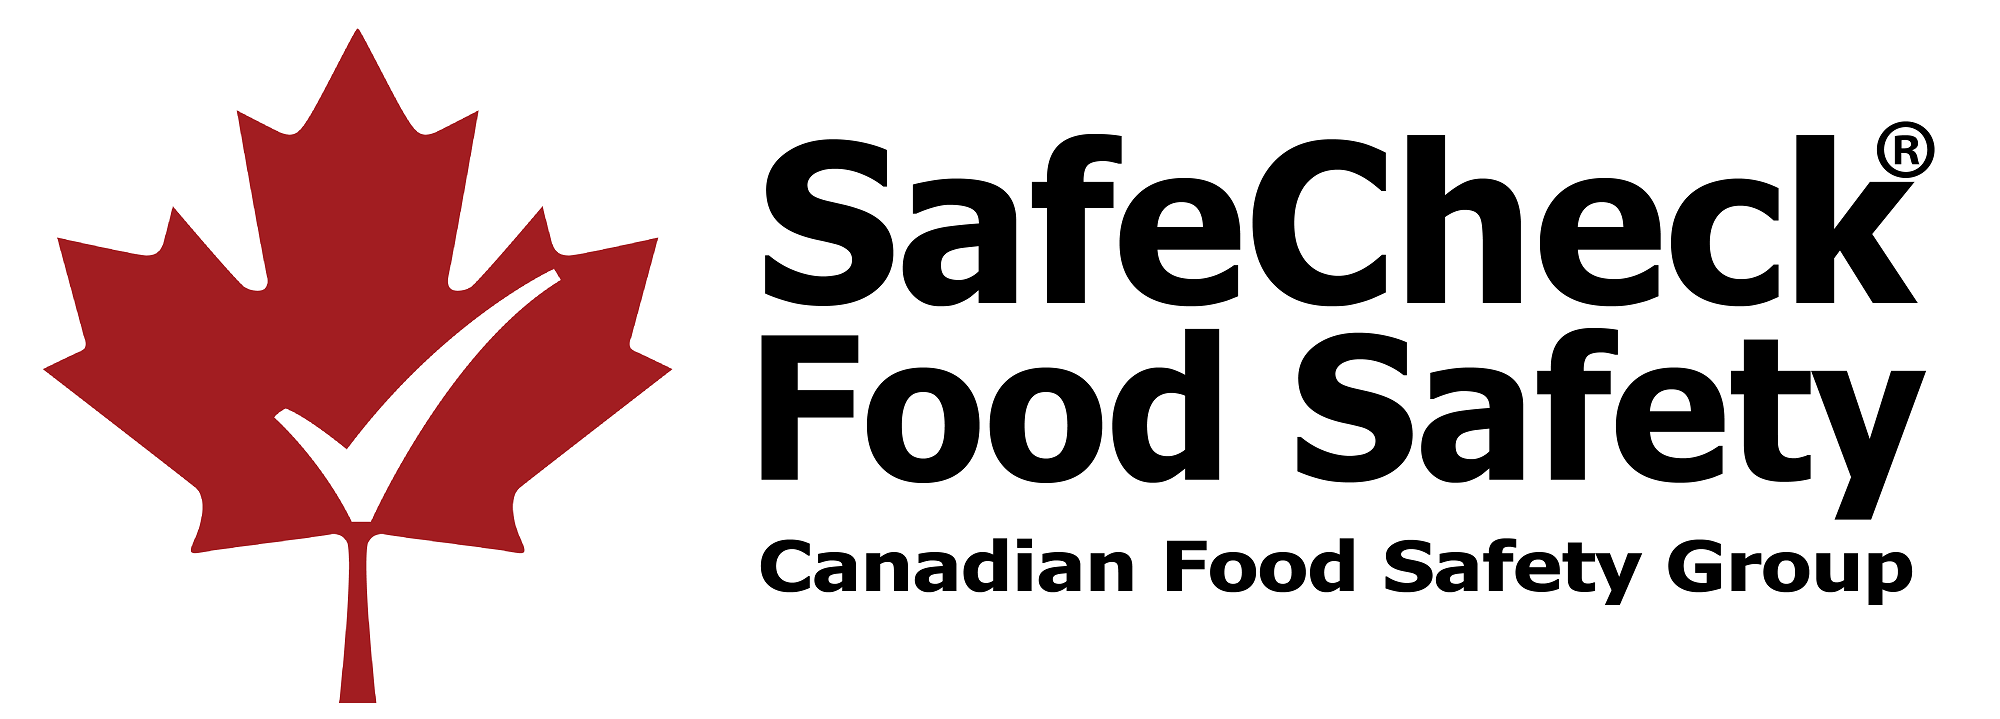 Canadian Food Safety Group Logo